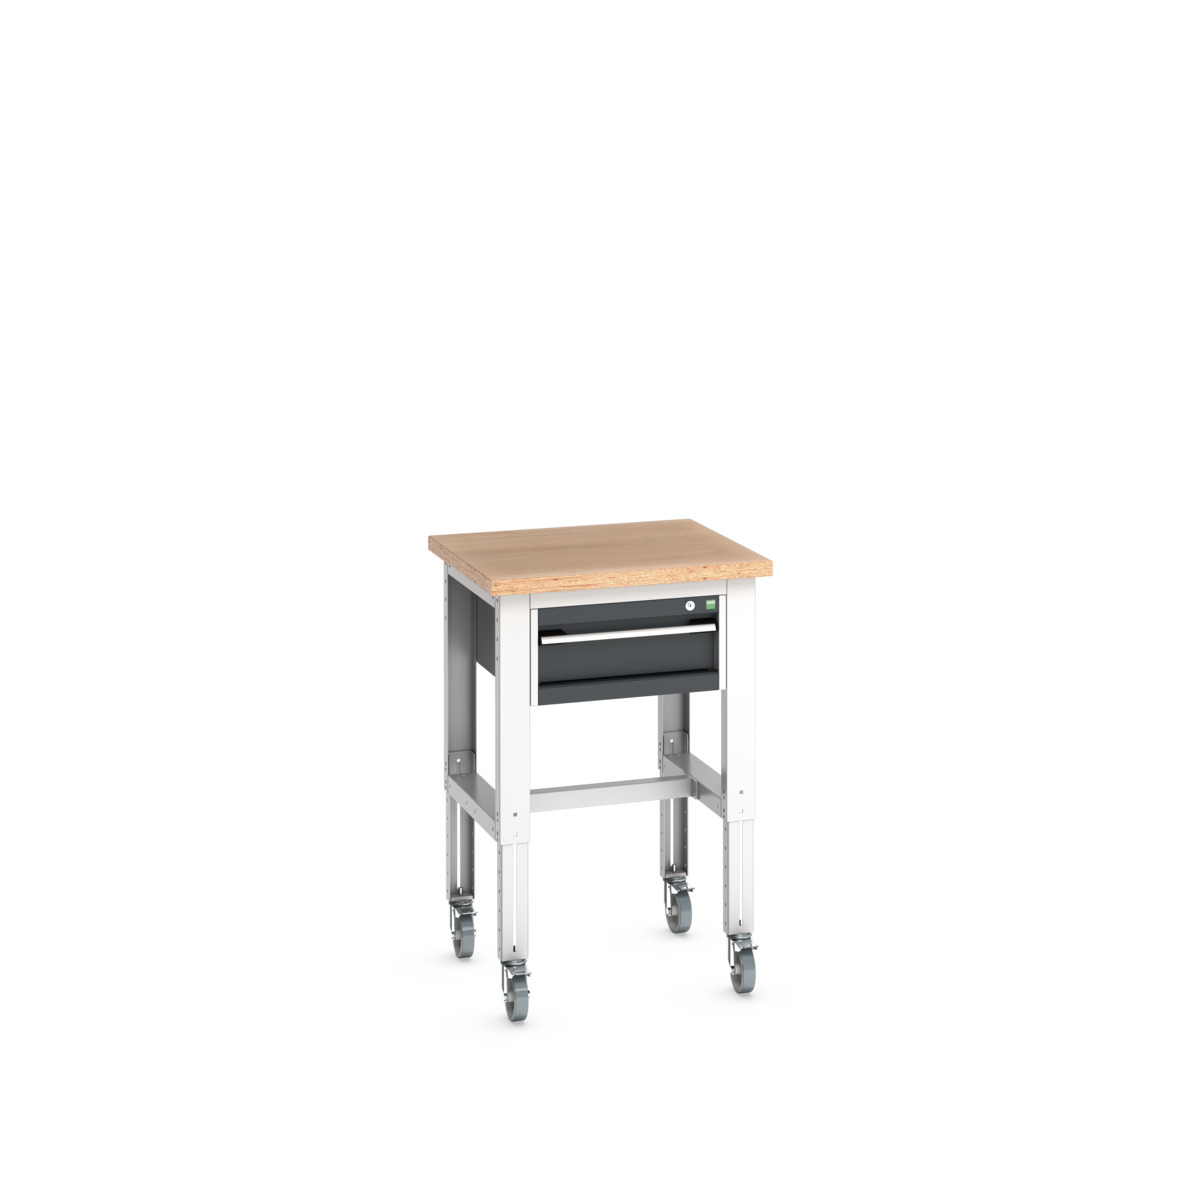 41003271. - cubio mobile bench adj height (mpx)